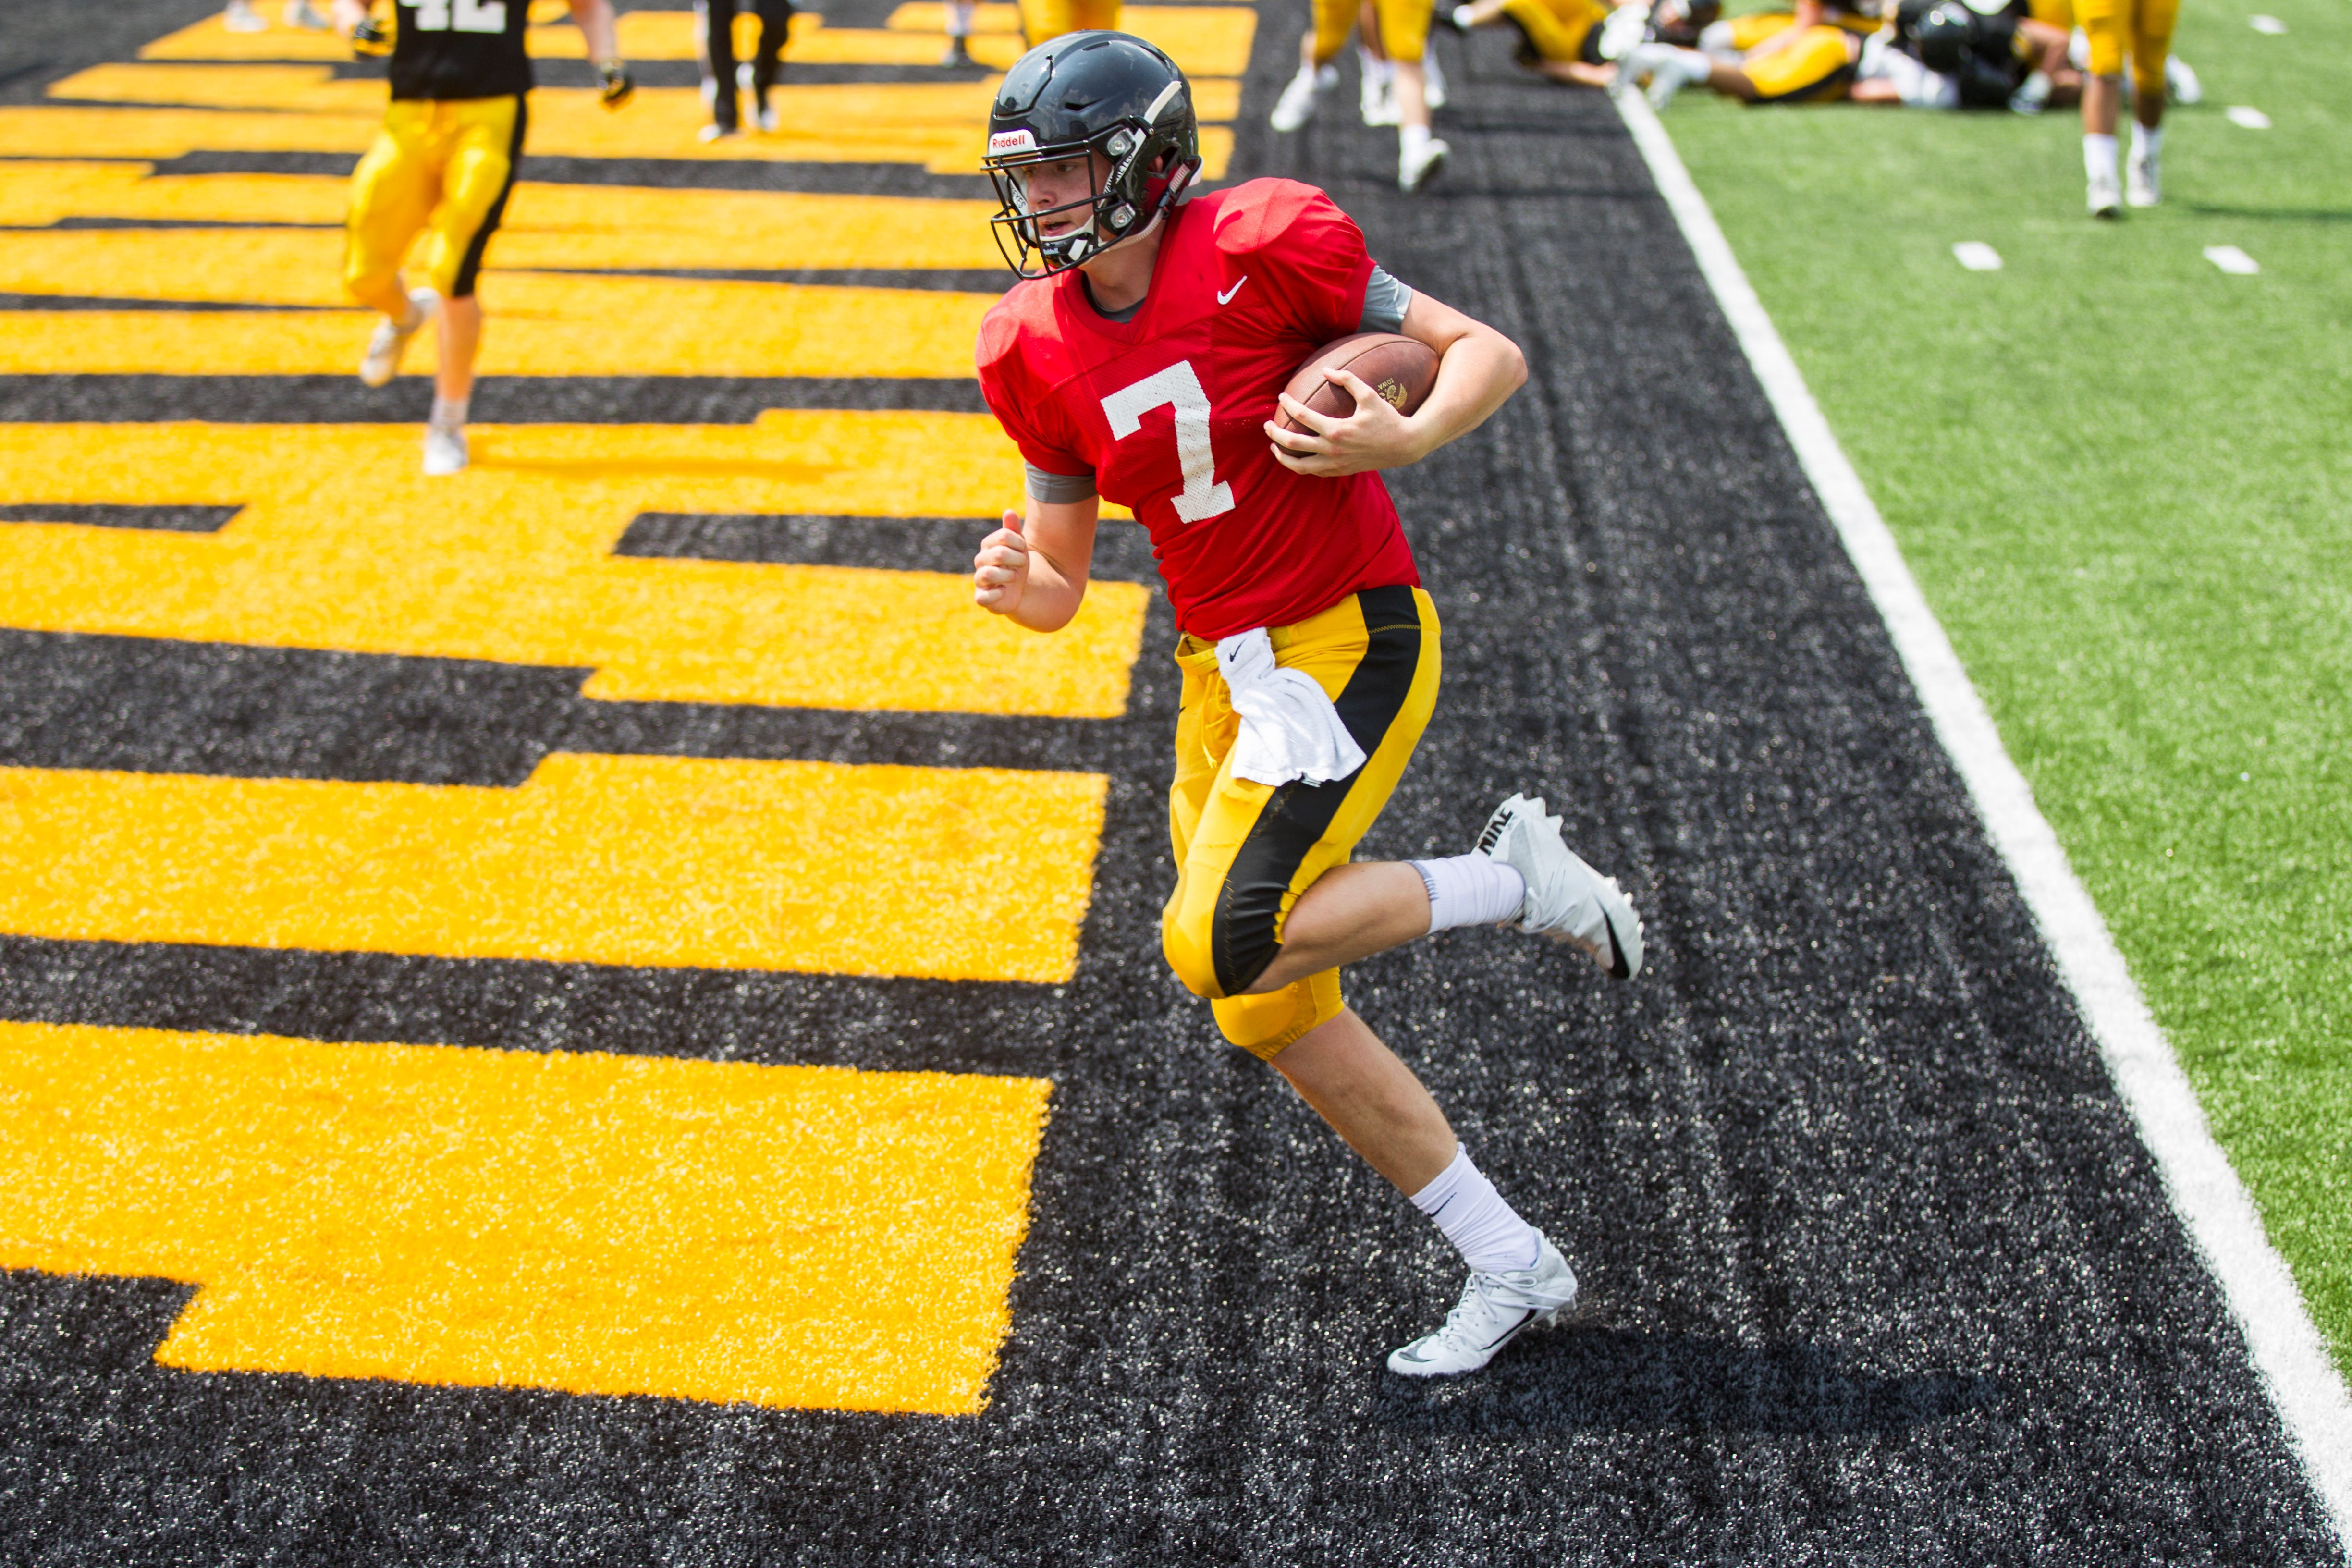 Iowa quarterback Spencer Petras crosses the goal line on a rush during a Kids Day practice on Saturday, Aug. 11, 2018, at Kinnick Stadium in Iowa City.